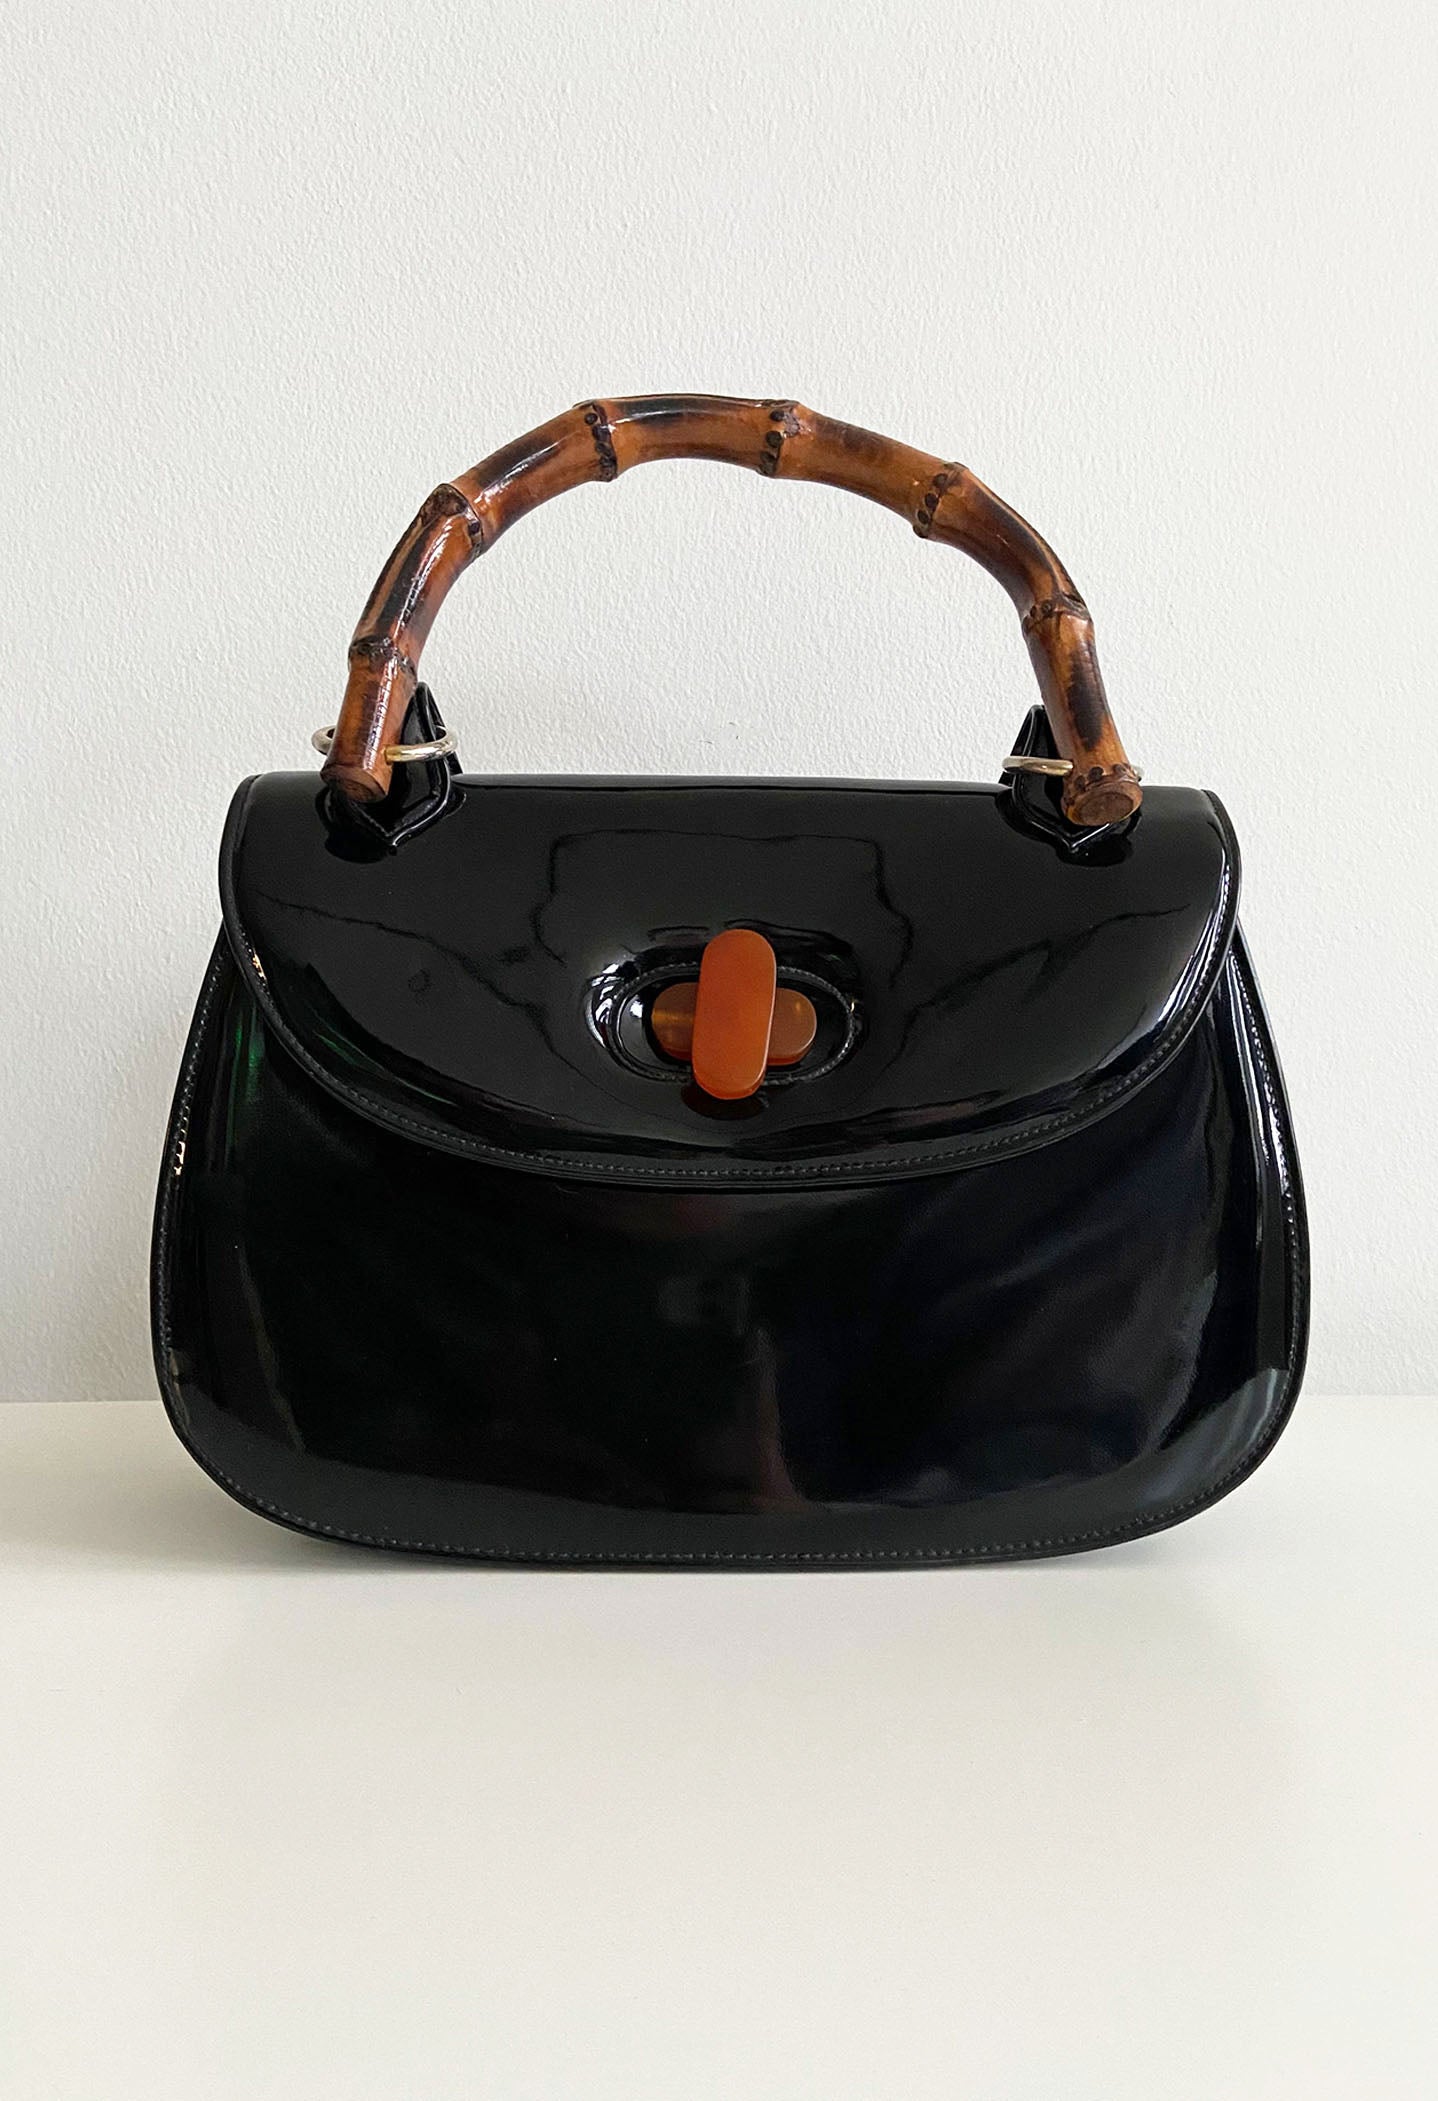 Black Patent Bag With Bamboo Handle